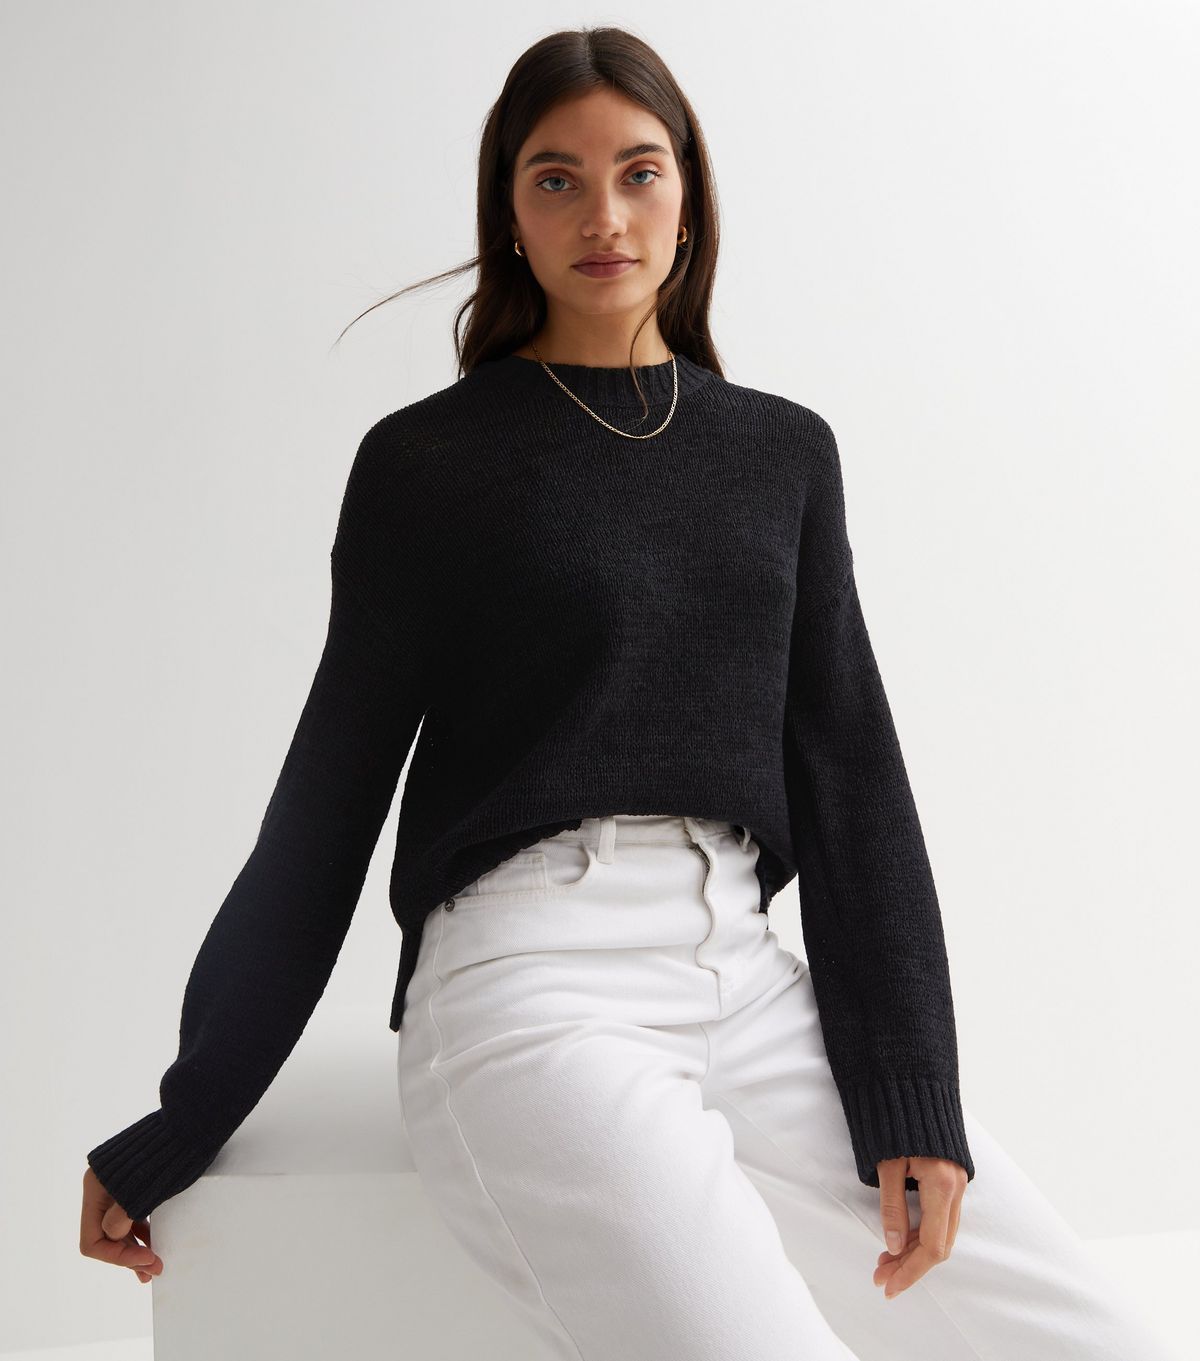 Black Knit Crew Neck Jumper
						
						Add to Saved Items
						Remove from Saved Items | New Look (UK)